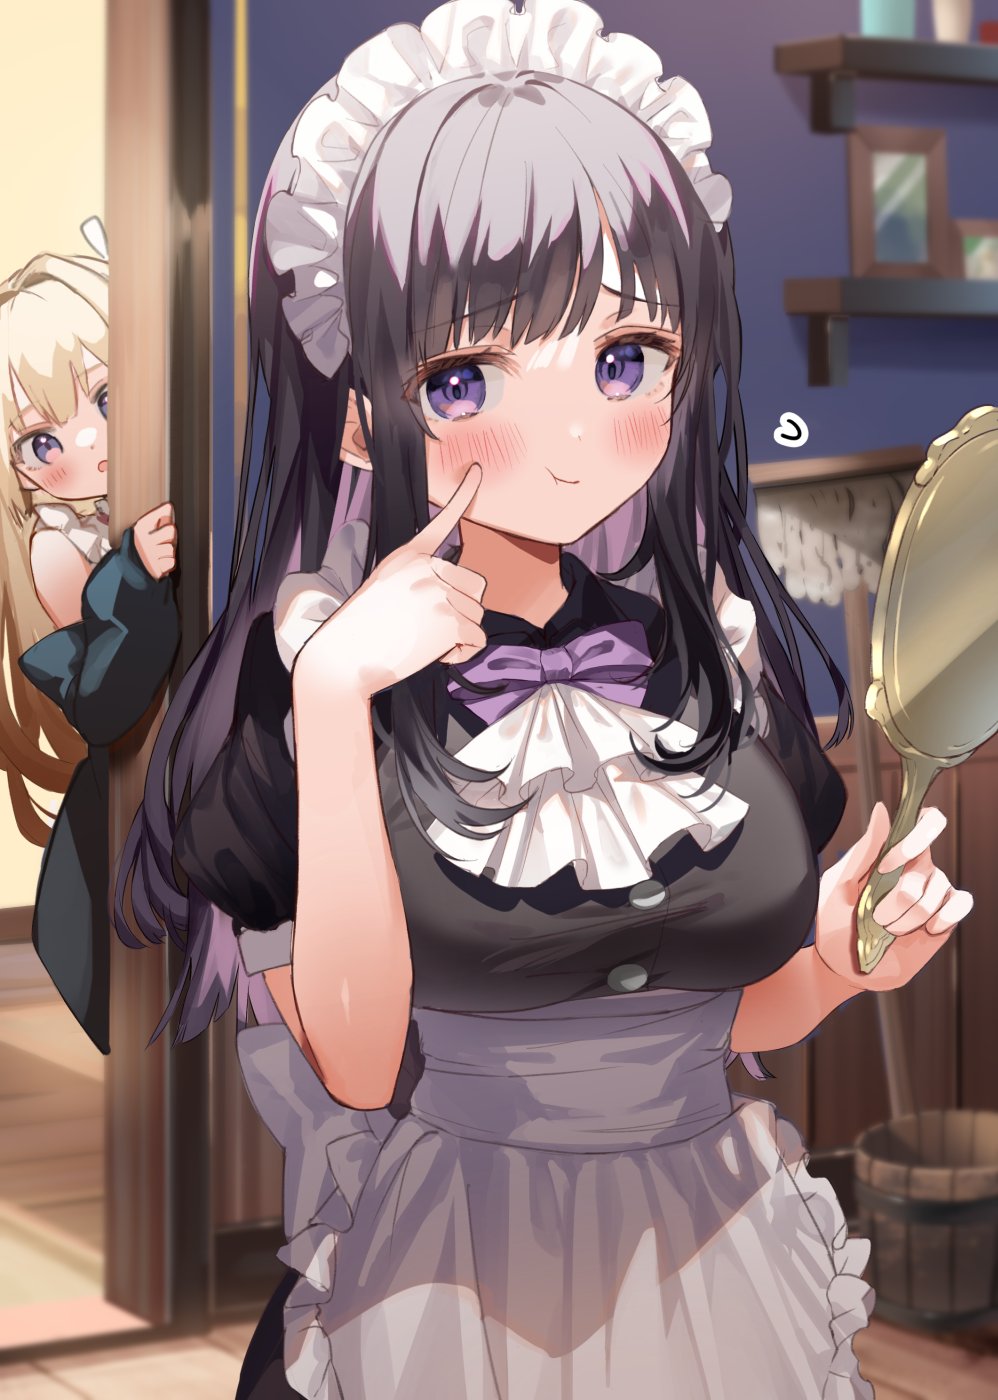 2girls :t apron bangs black_hair black_shirt blonde_hair blush bow bowtie breasts commentary_request eyebrows_visible_through_hair finger_to_cheek hand_mirror highres holding holding_mirror indoors kanda_done large_breasts long_hair looking_at_another looking_at_viewer maid maid_headdress mirror multiple_girls original peeking_out puffy_short_sleeves puffy_sleeves purple_bow purple_neckwear shirt short_sleeves violet_eyes waist_apron white_apron wooden_floor